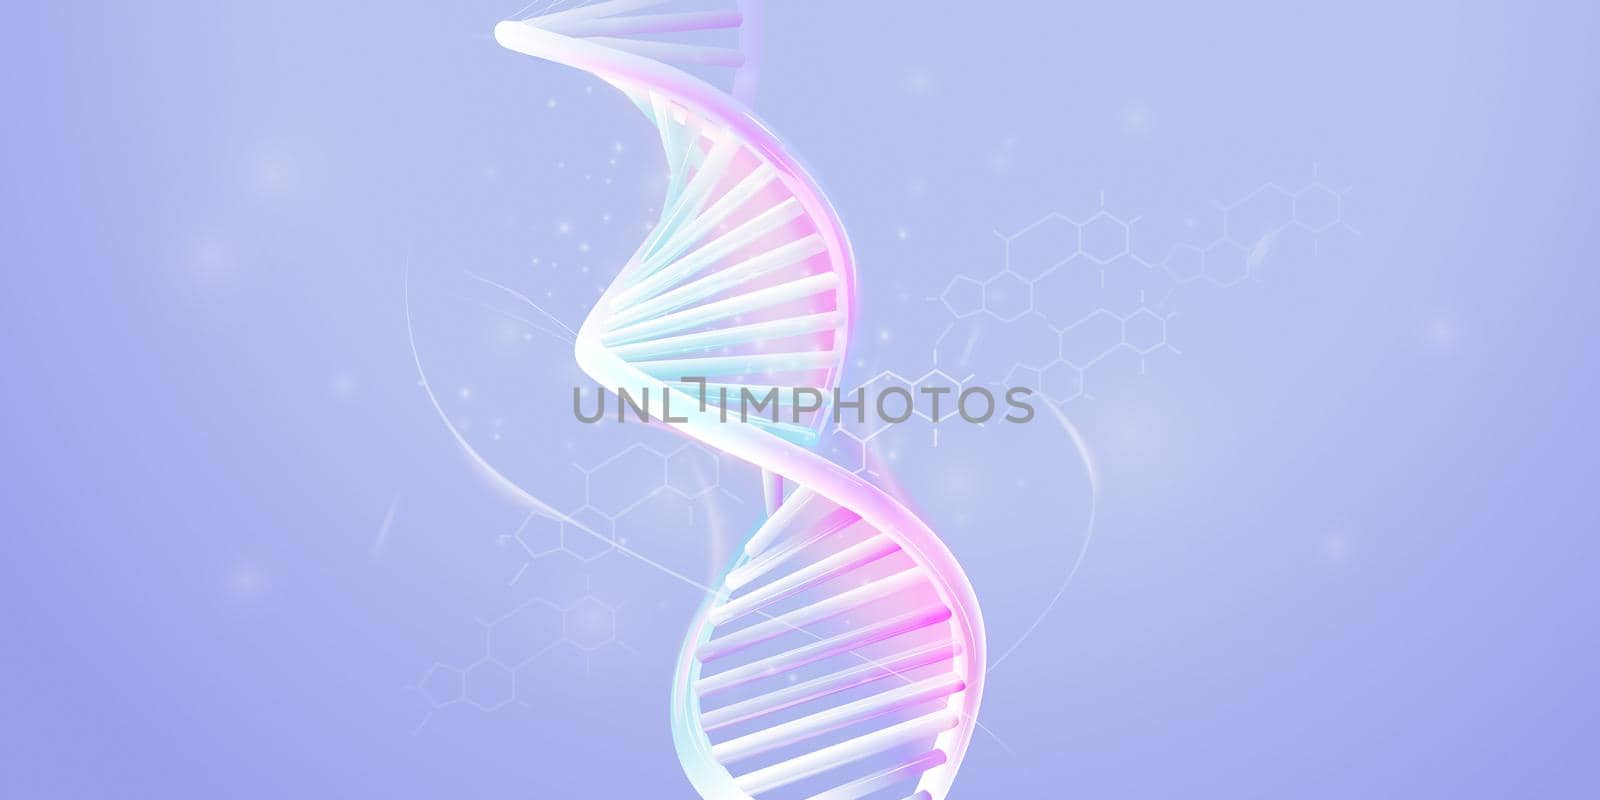 Model of abstract DNA double helix on a pale violet background.